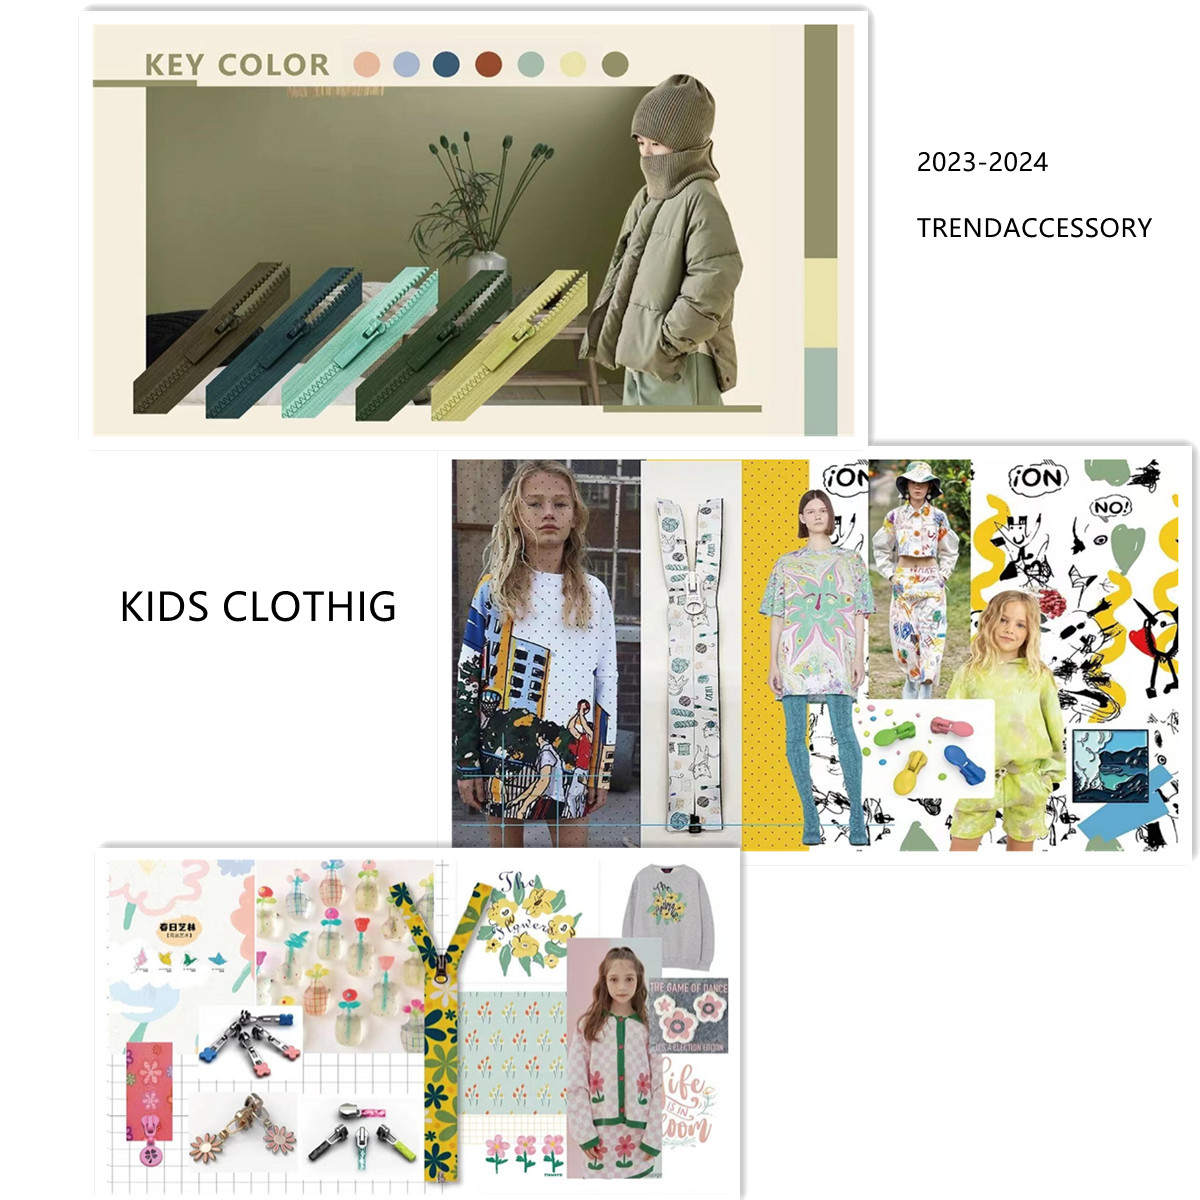 Do you know what is the 2023-2024 trend accessory for kids clothing(collection 1）